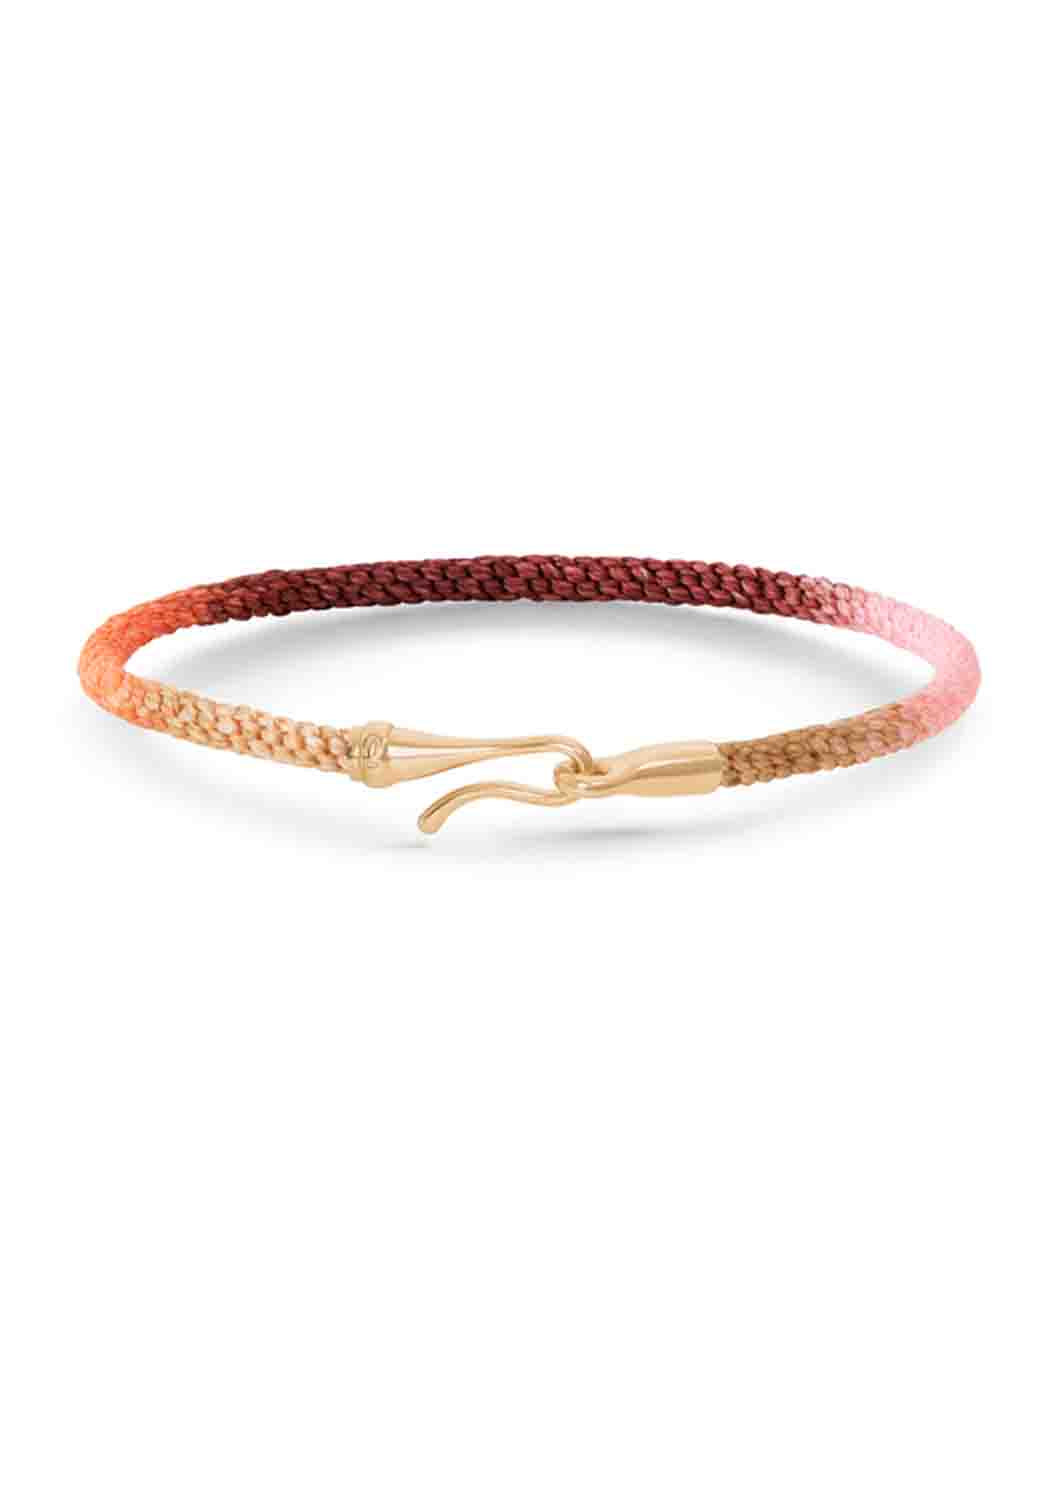 Ole Lynggaard Special Edition Life 18KYG Berry Rope Bracelet | Ref. A3040-414 | OsterJewelers.com